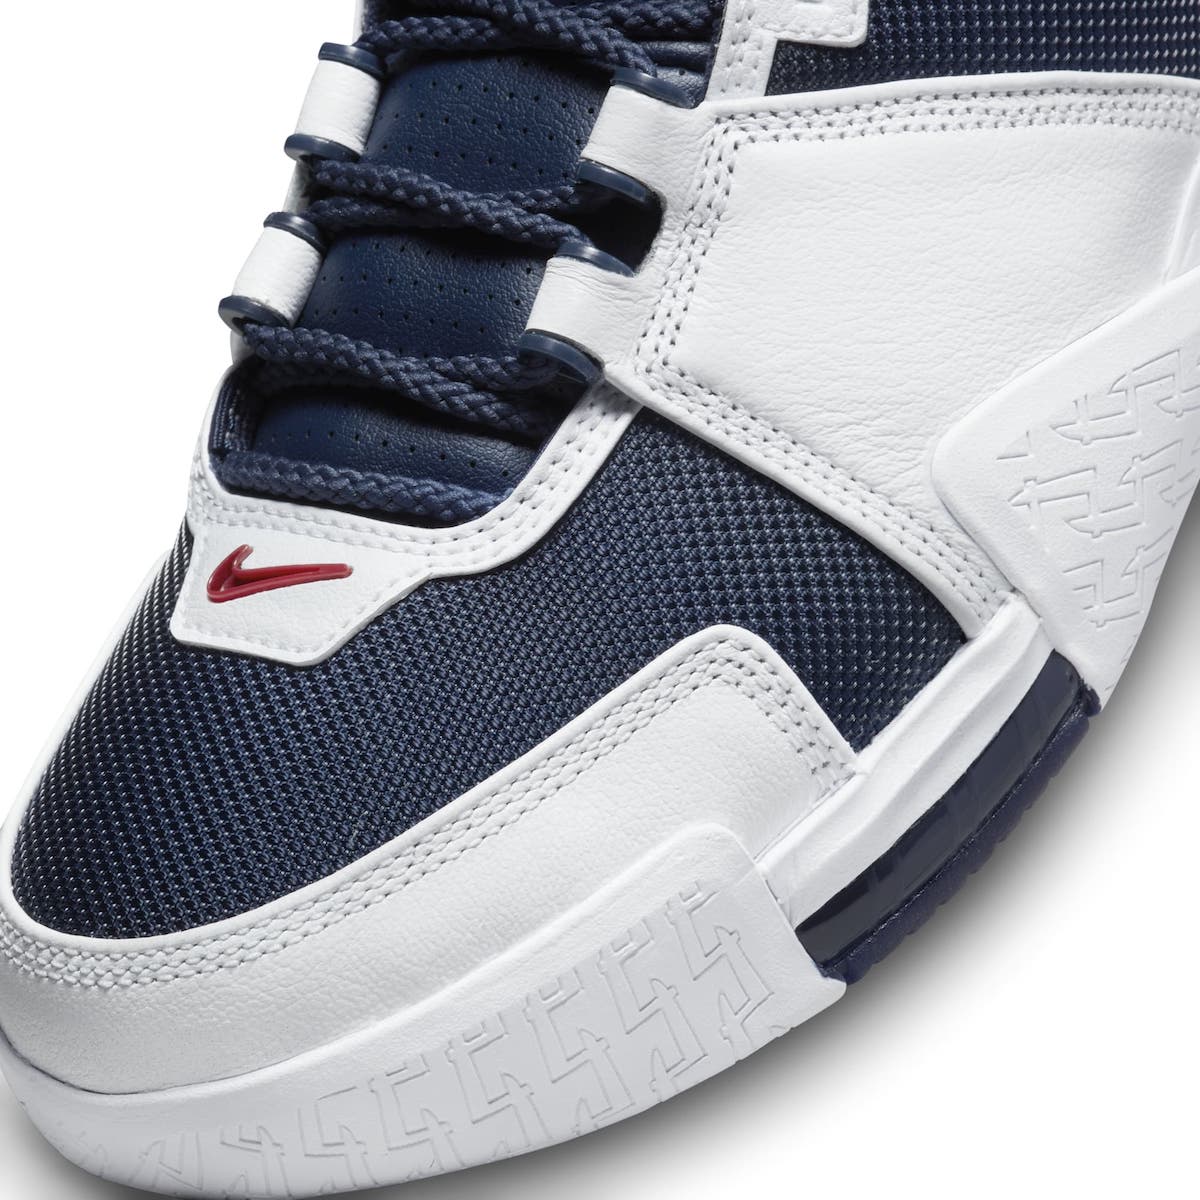 Nike-LeBron-2-USA-Midnight-Navy-2022-DR0826-100-Release-Date-7.jpeg